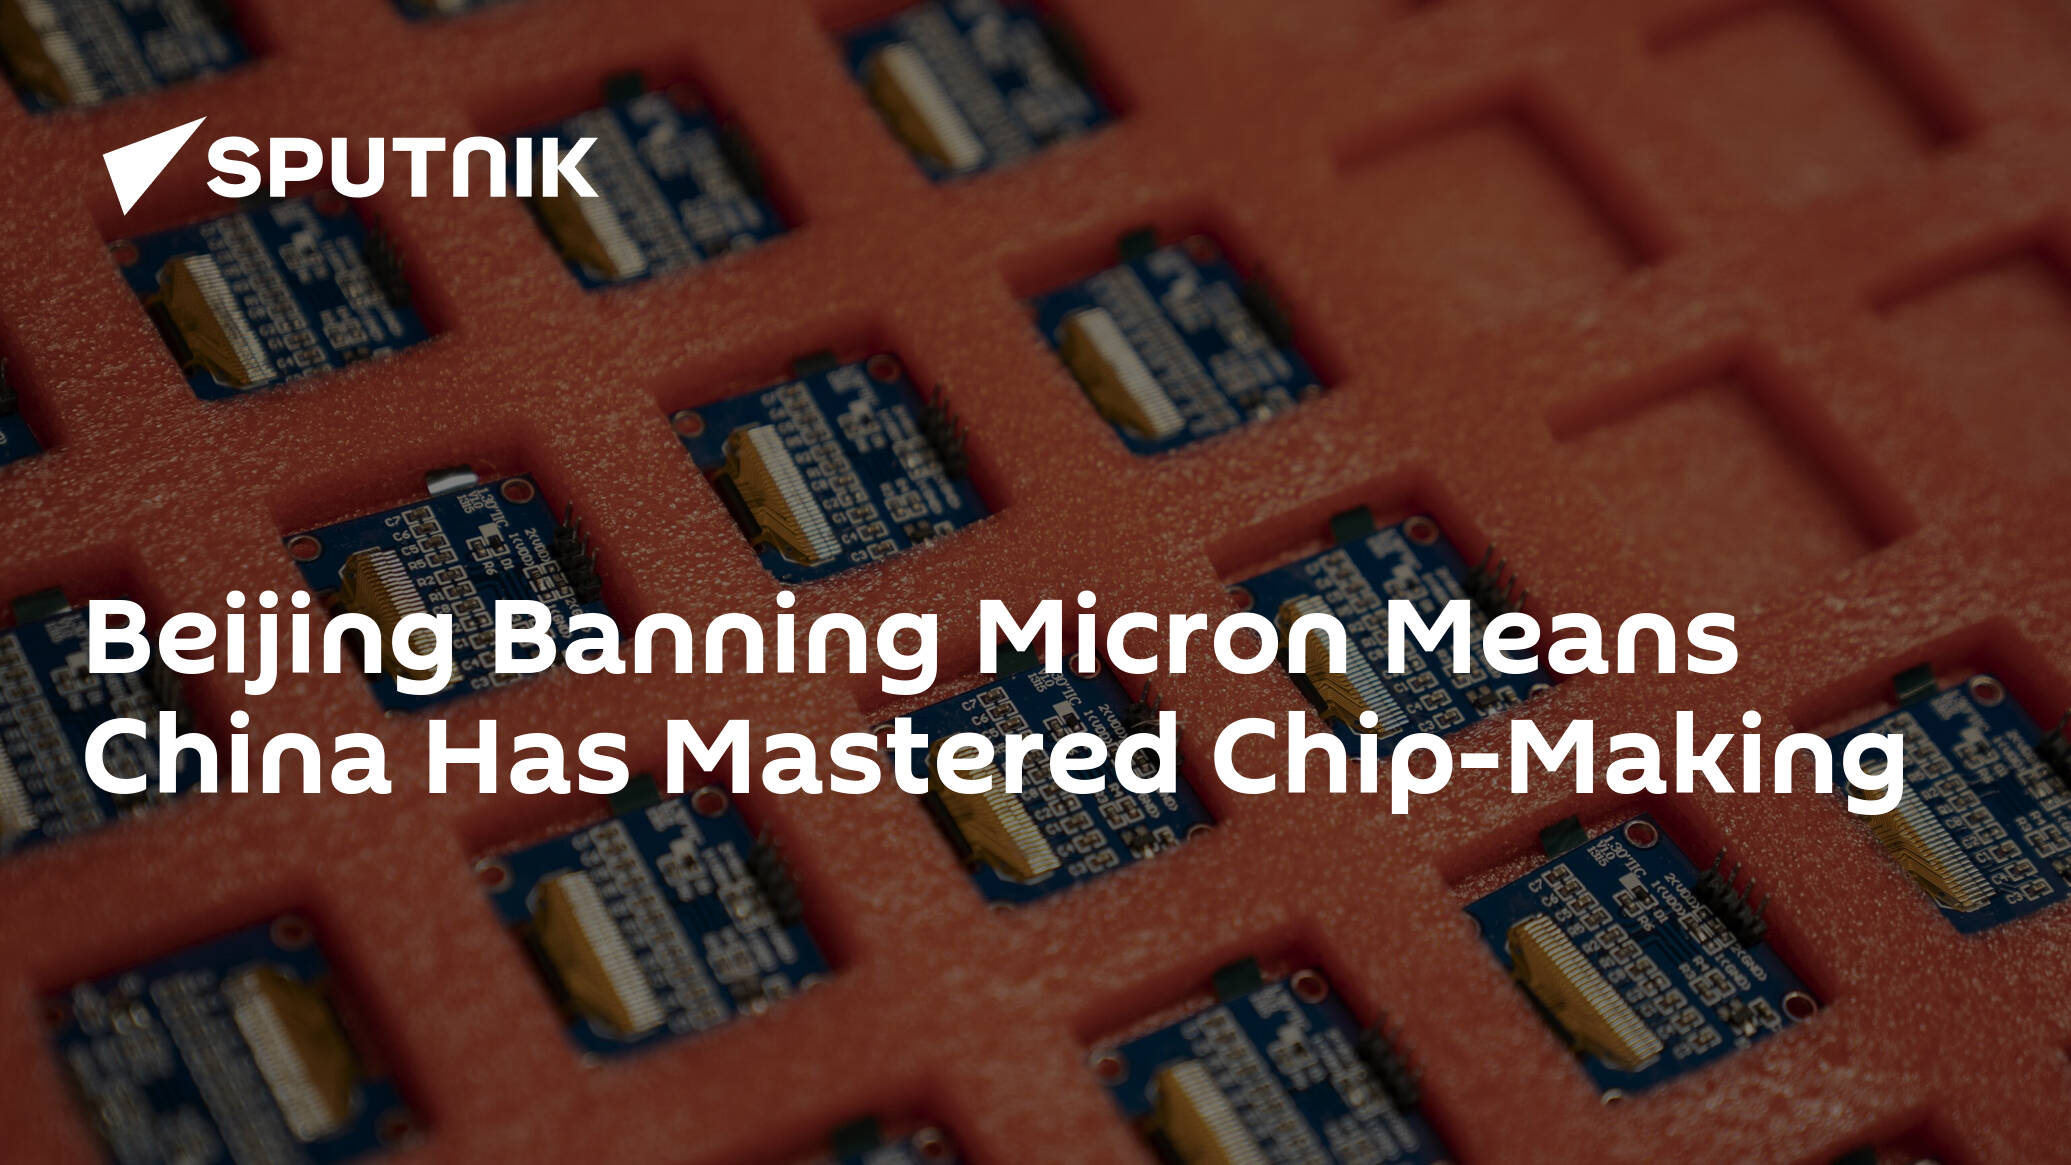 Beijing Banning Micron Means China Has Mastered Chip-Making